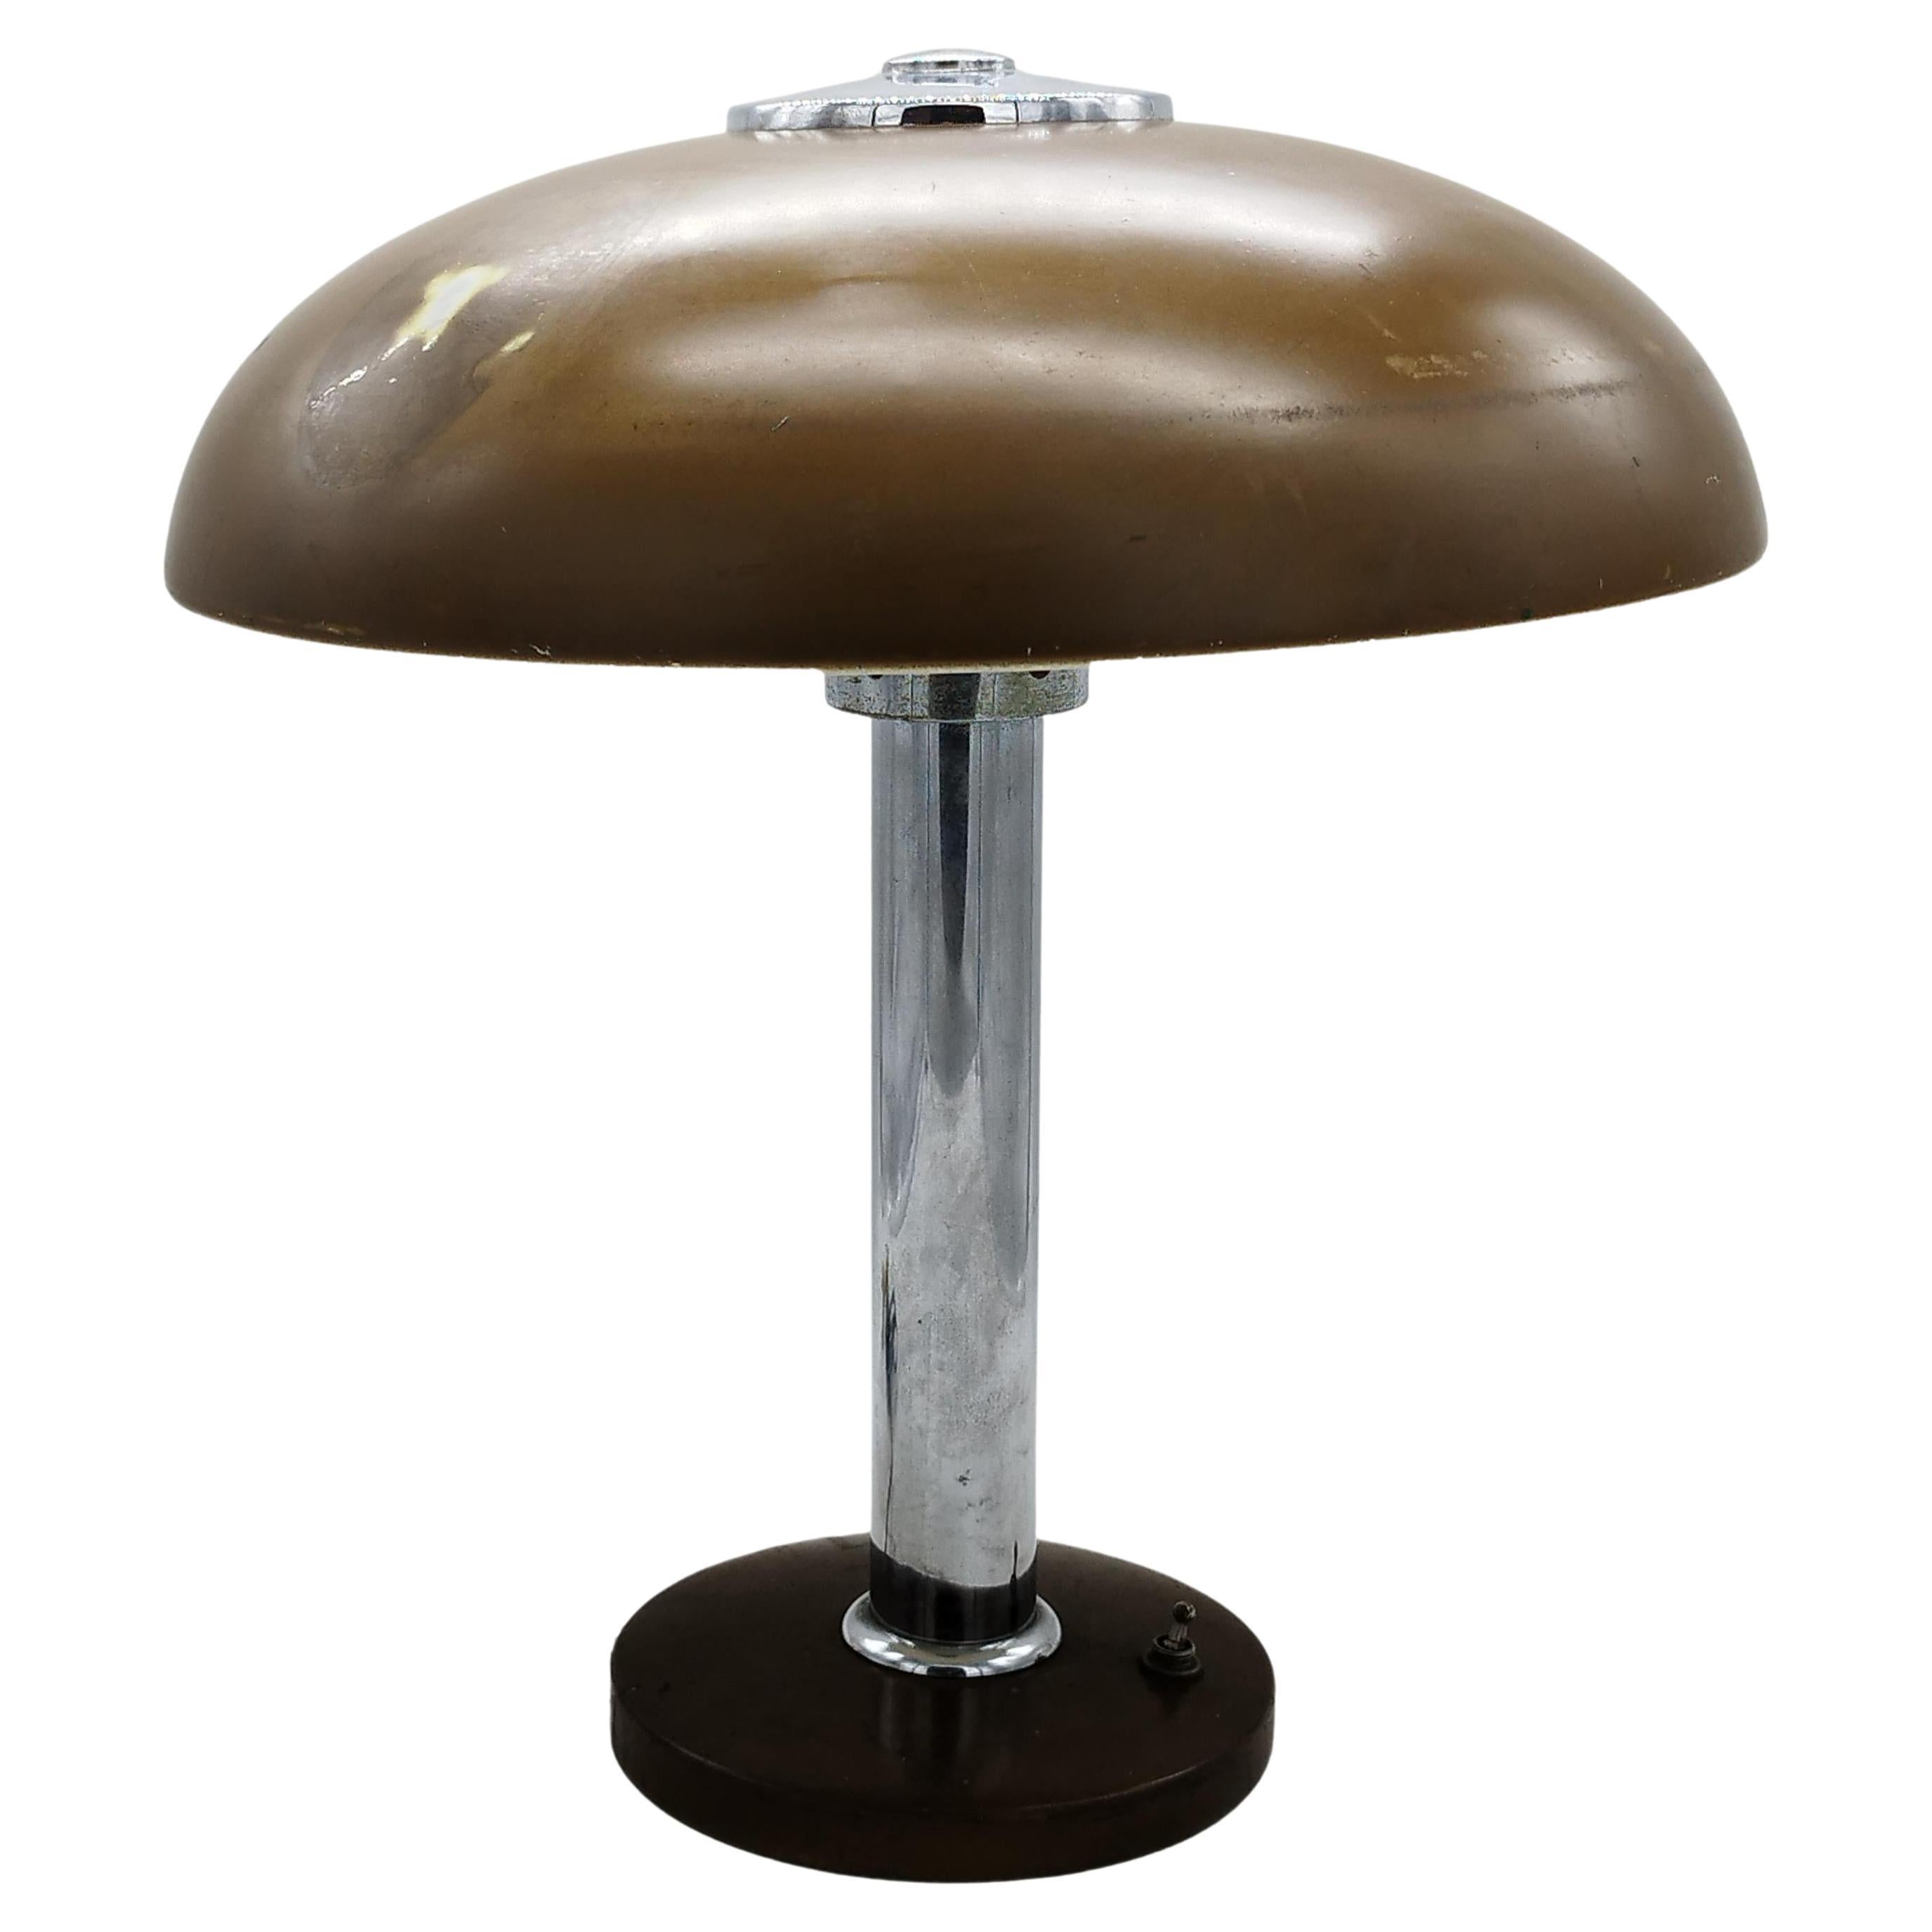 Gio Ponti for Ugo Pollice Model 546 Table Lamp, Italy, 1940s For Sale